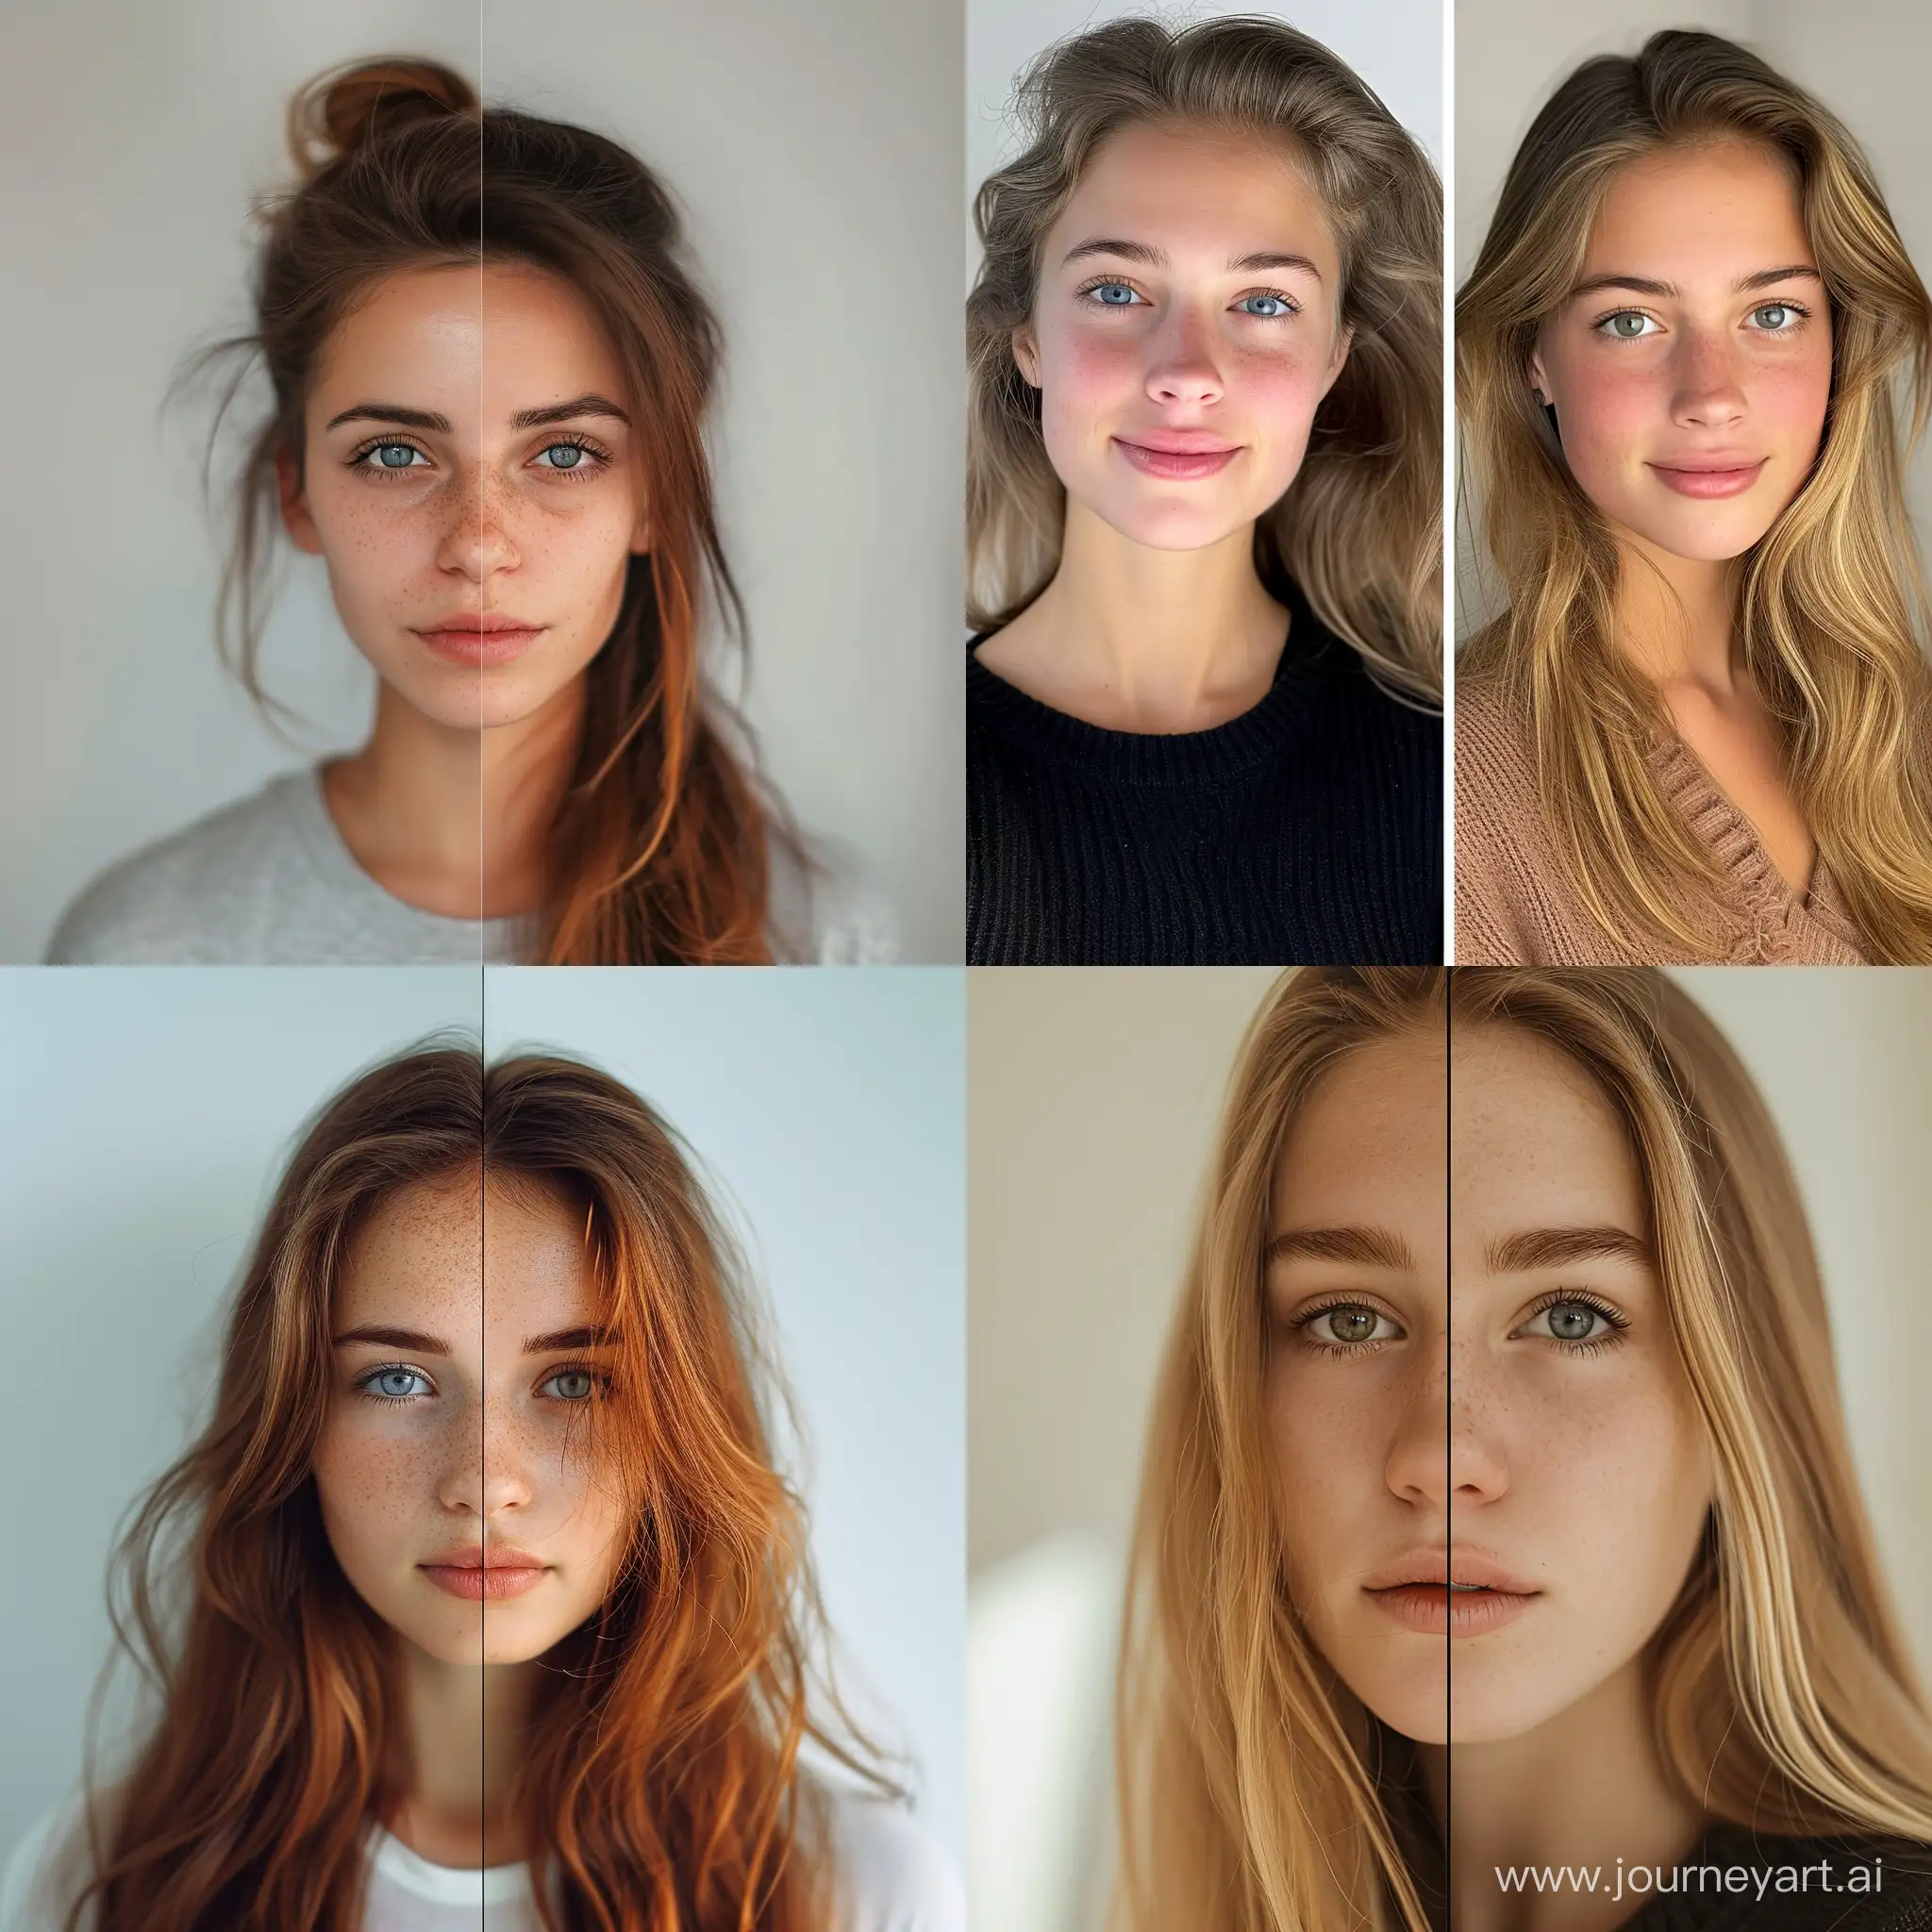 Blended-Faces-Photo-Collage-with-Versatile-Visual-Harmony